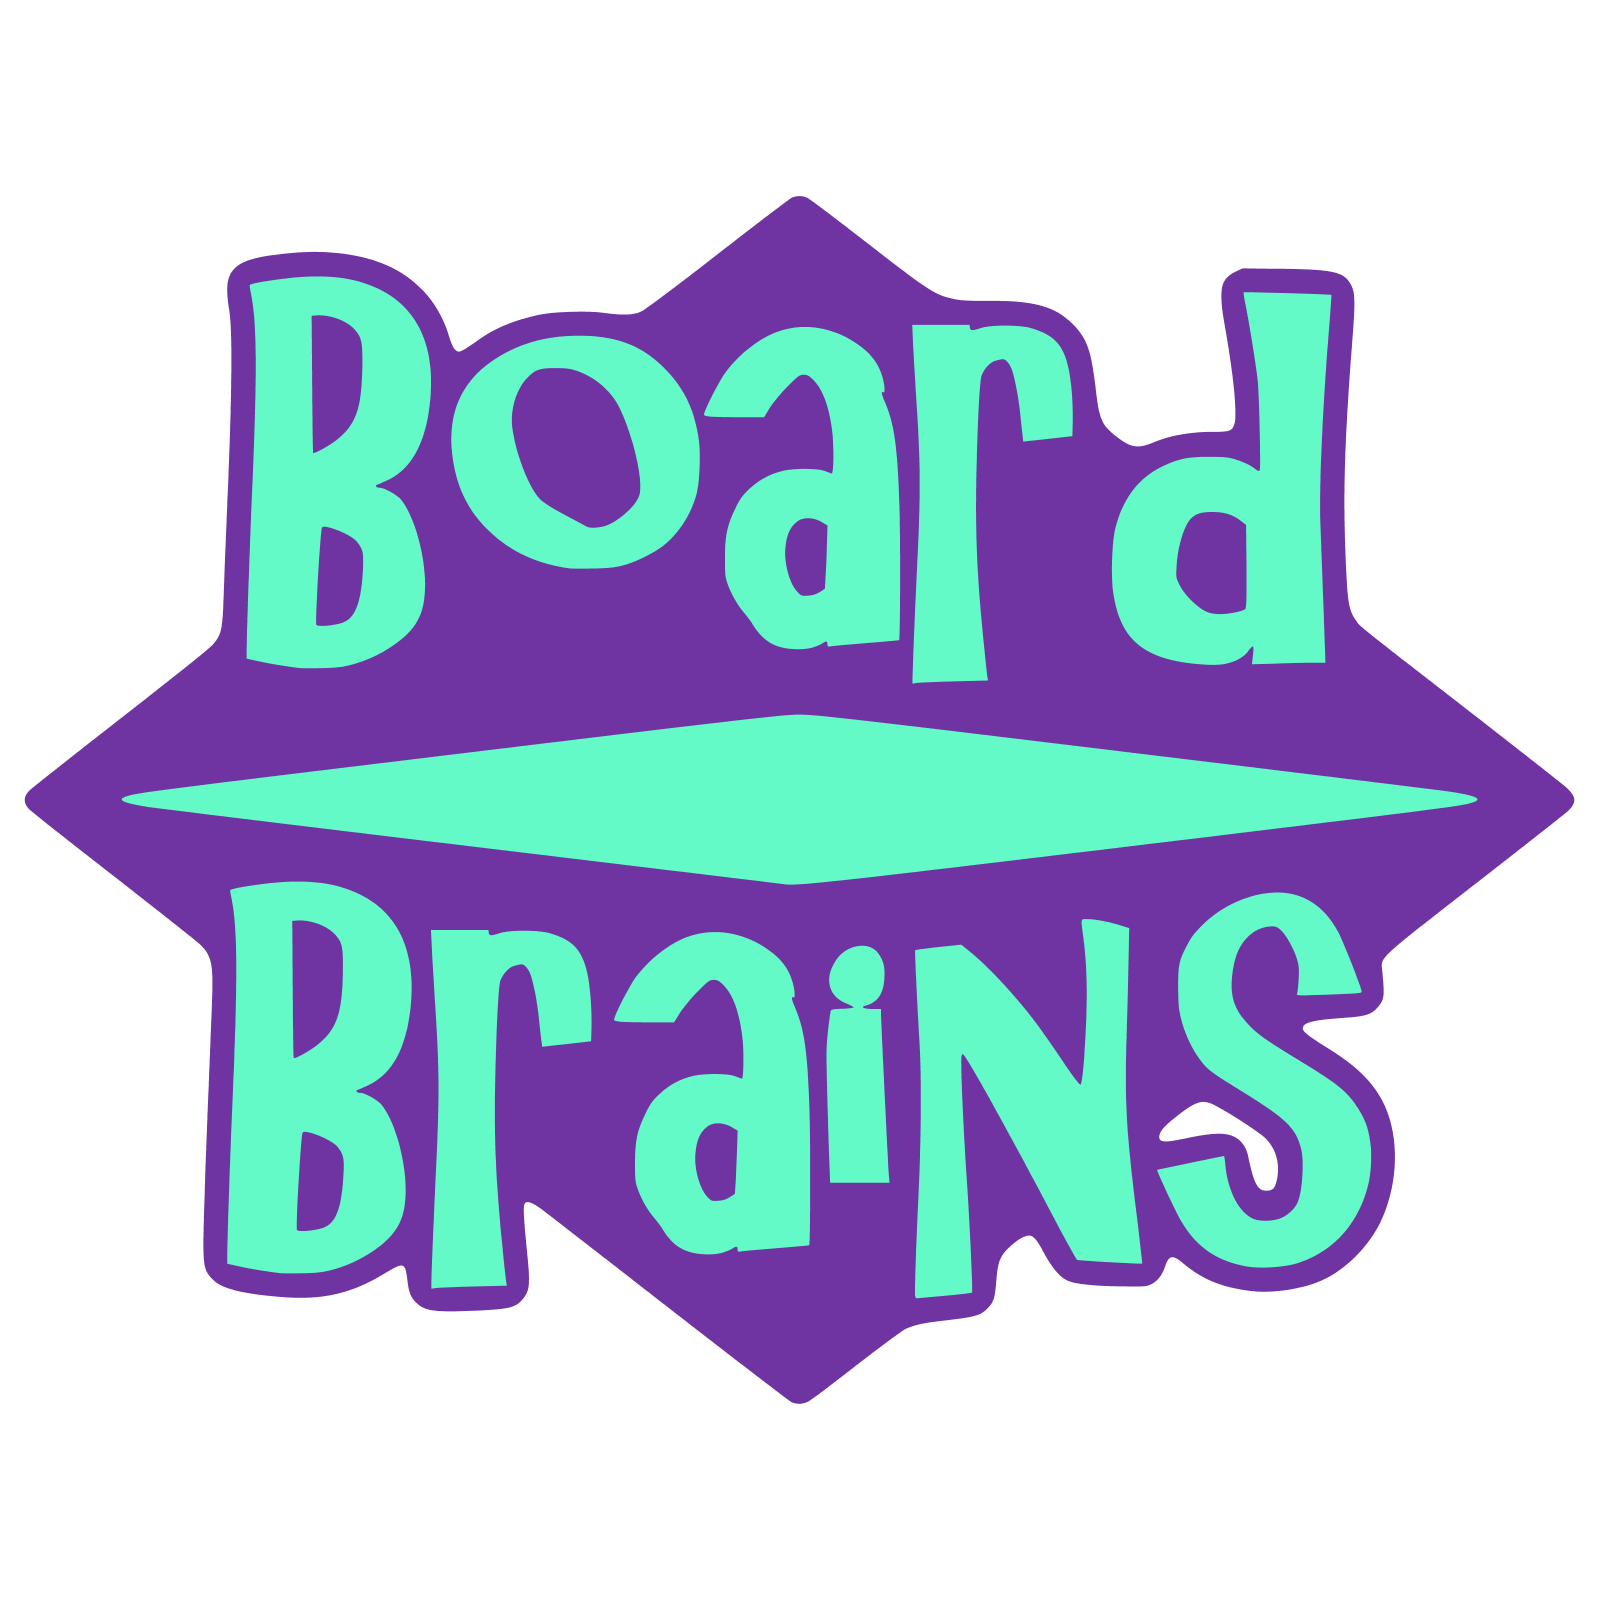 The first official Board Brains logo.  It simply features the words Board Brains on a squashed diamond background with a smaller, even more squashed diamond at the center.